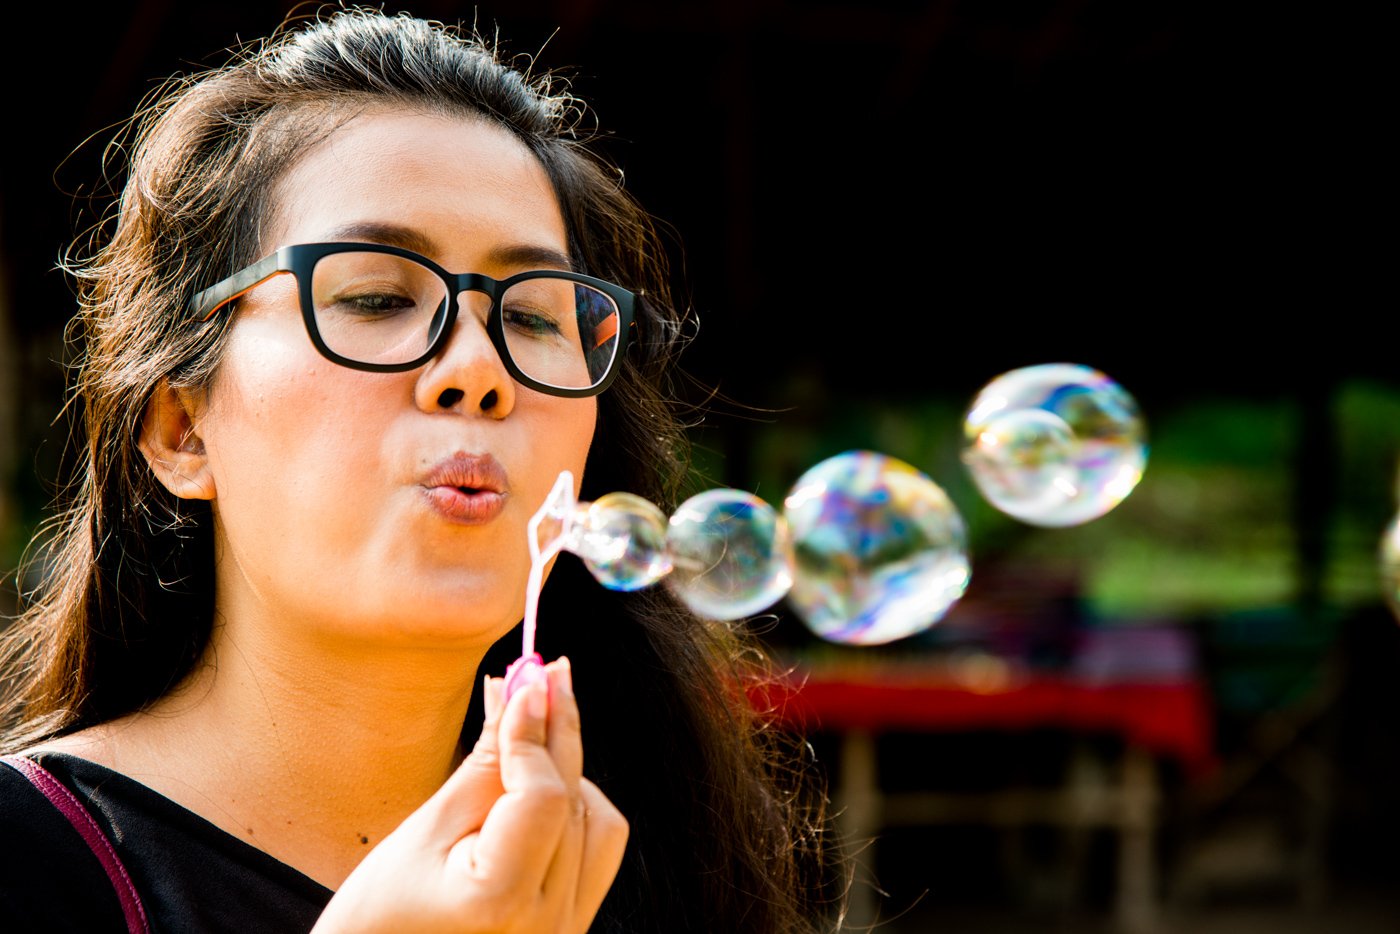 Close-up of a woman blowing bubble outside using rim portrait lighting